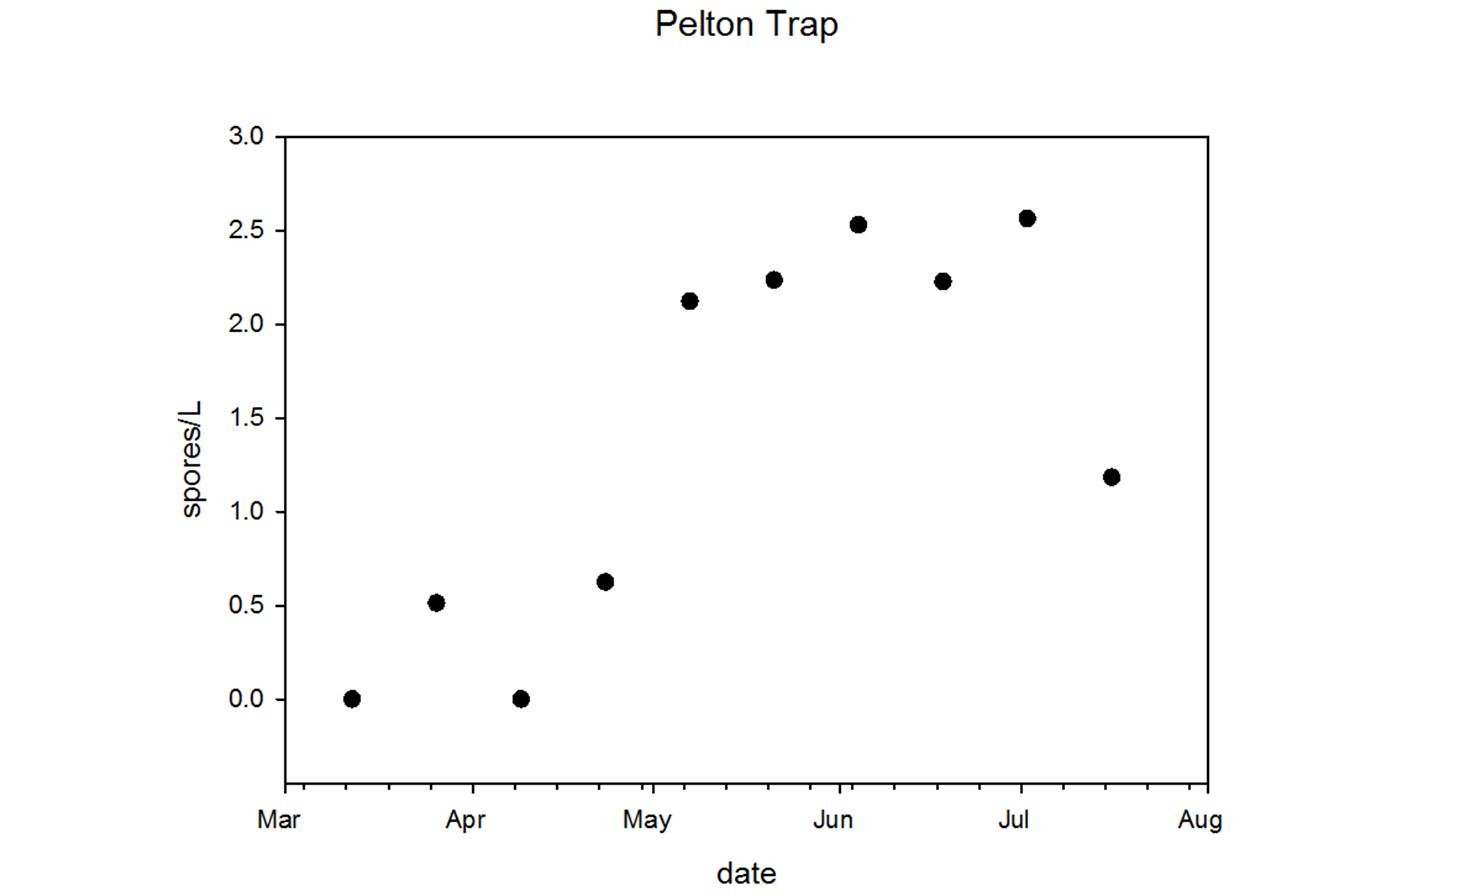 An image of a scatterplot chart comparing spores/L with the date collected in Pelton Trap.